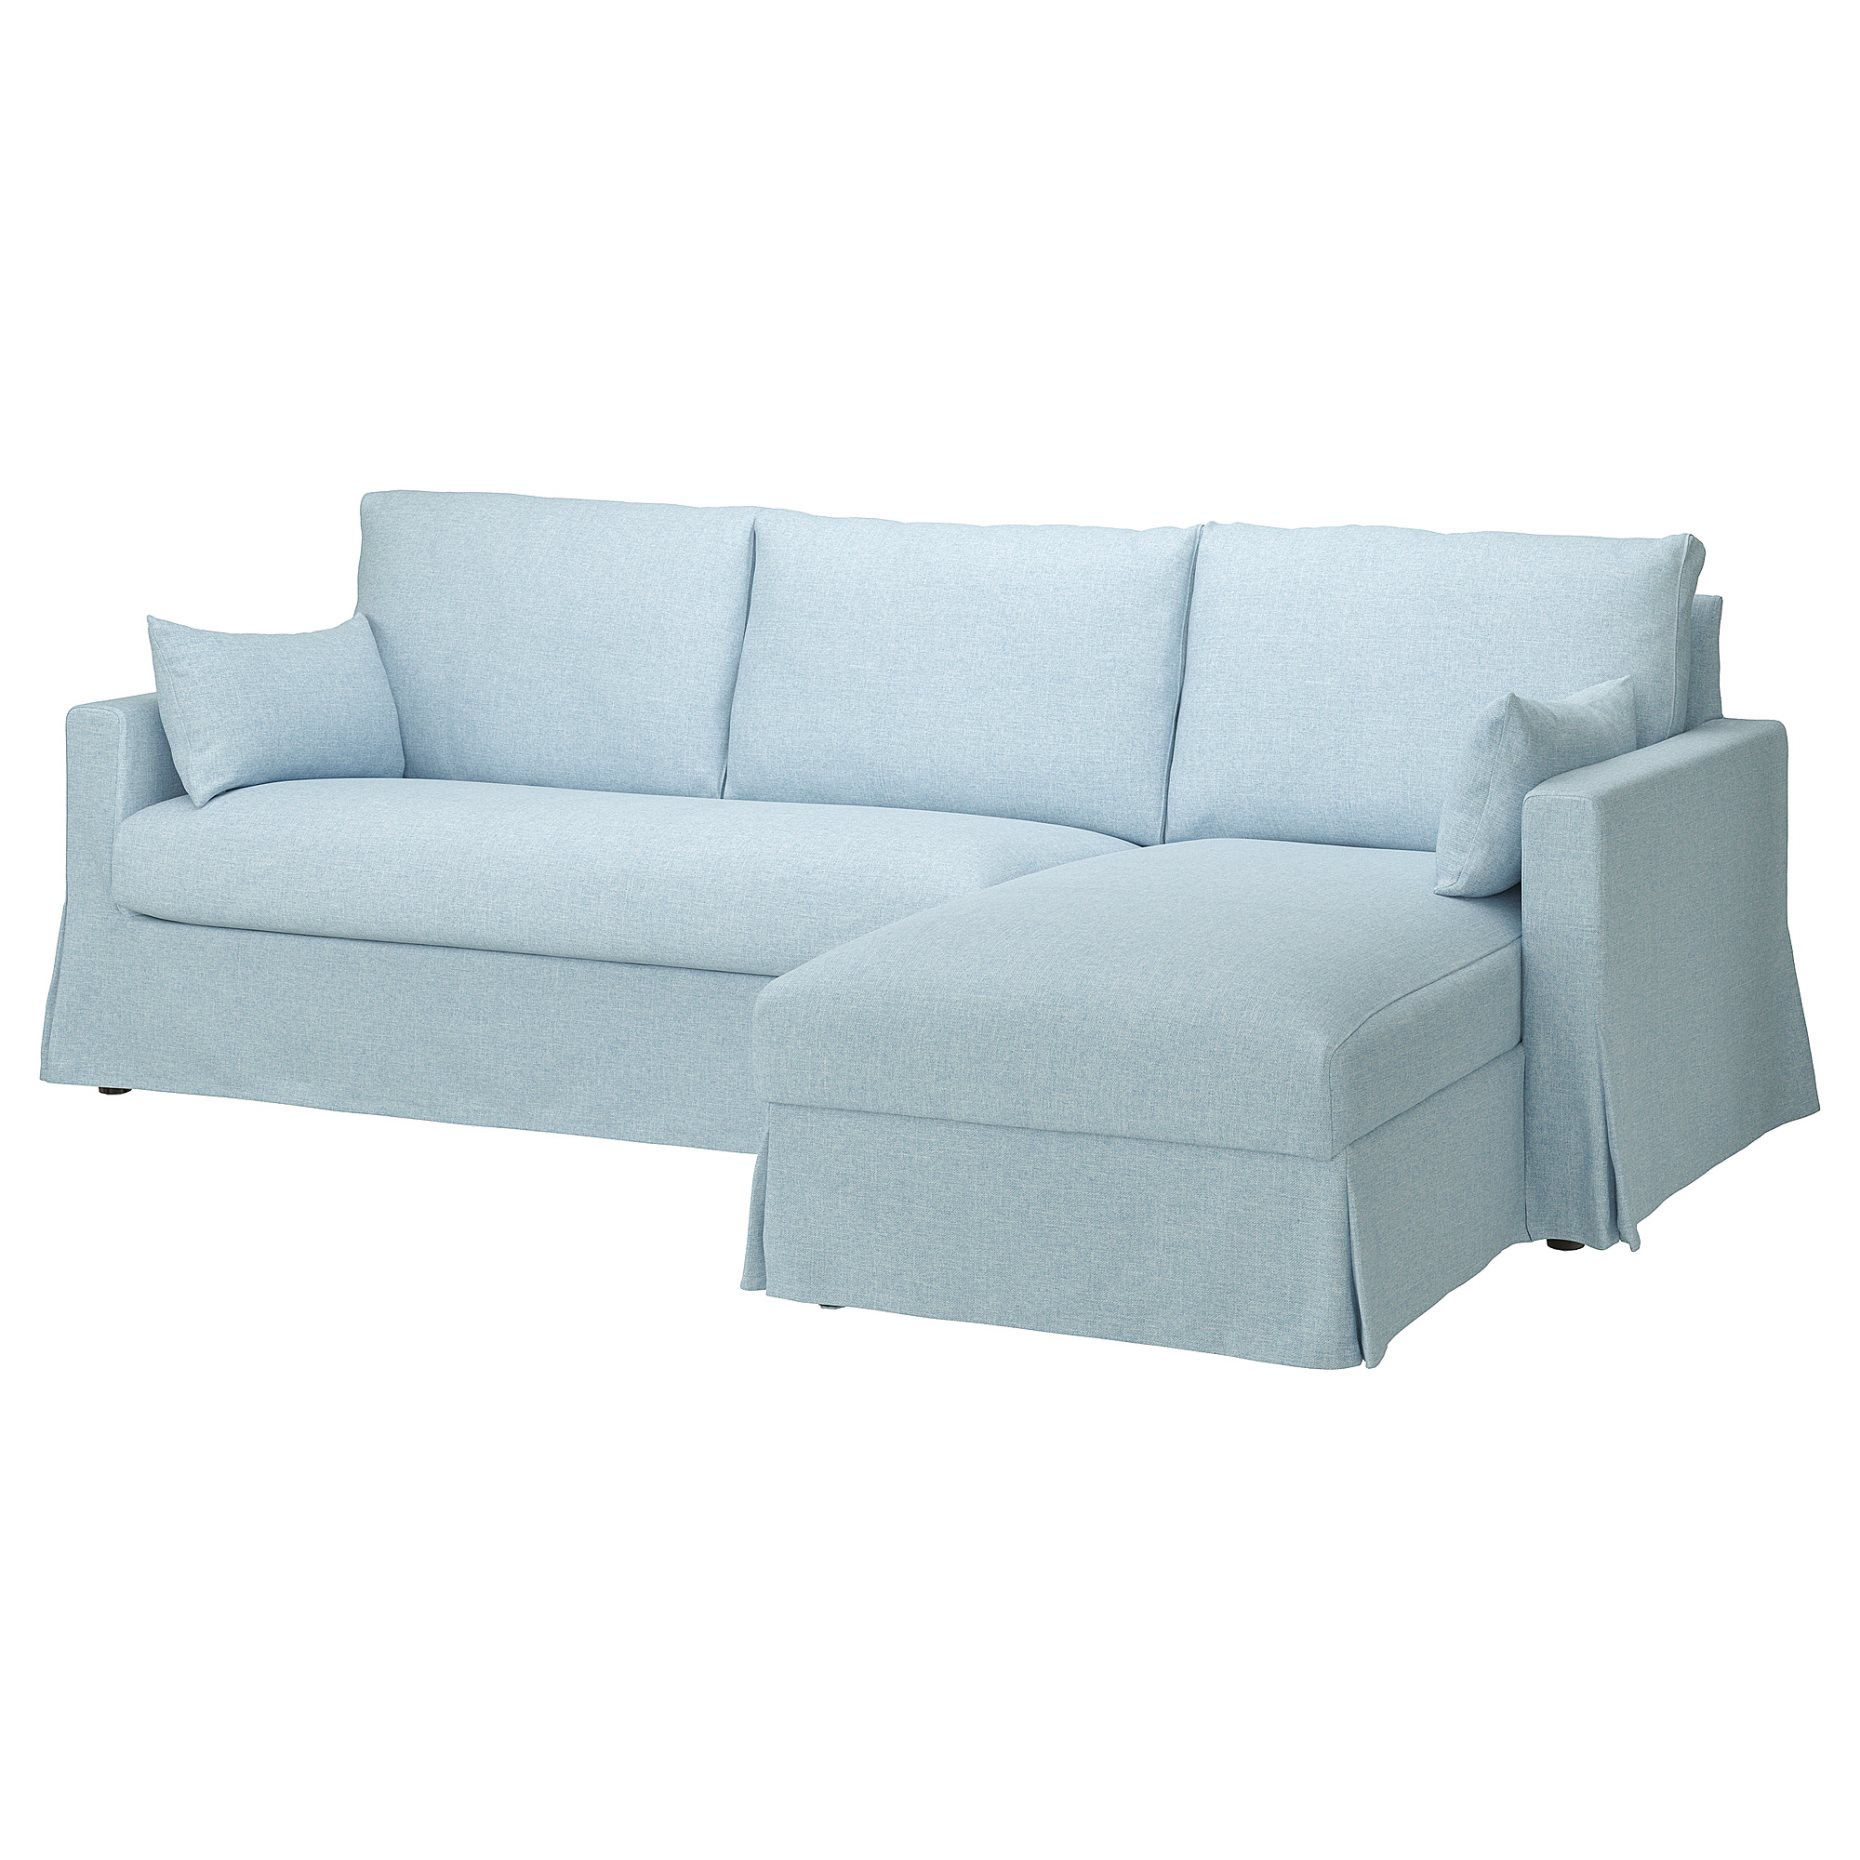 HYLTARP, cover f 3-seat sofa with chaise long, right, 005.473.40